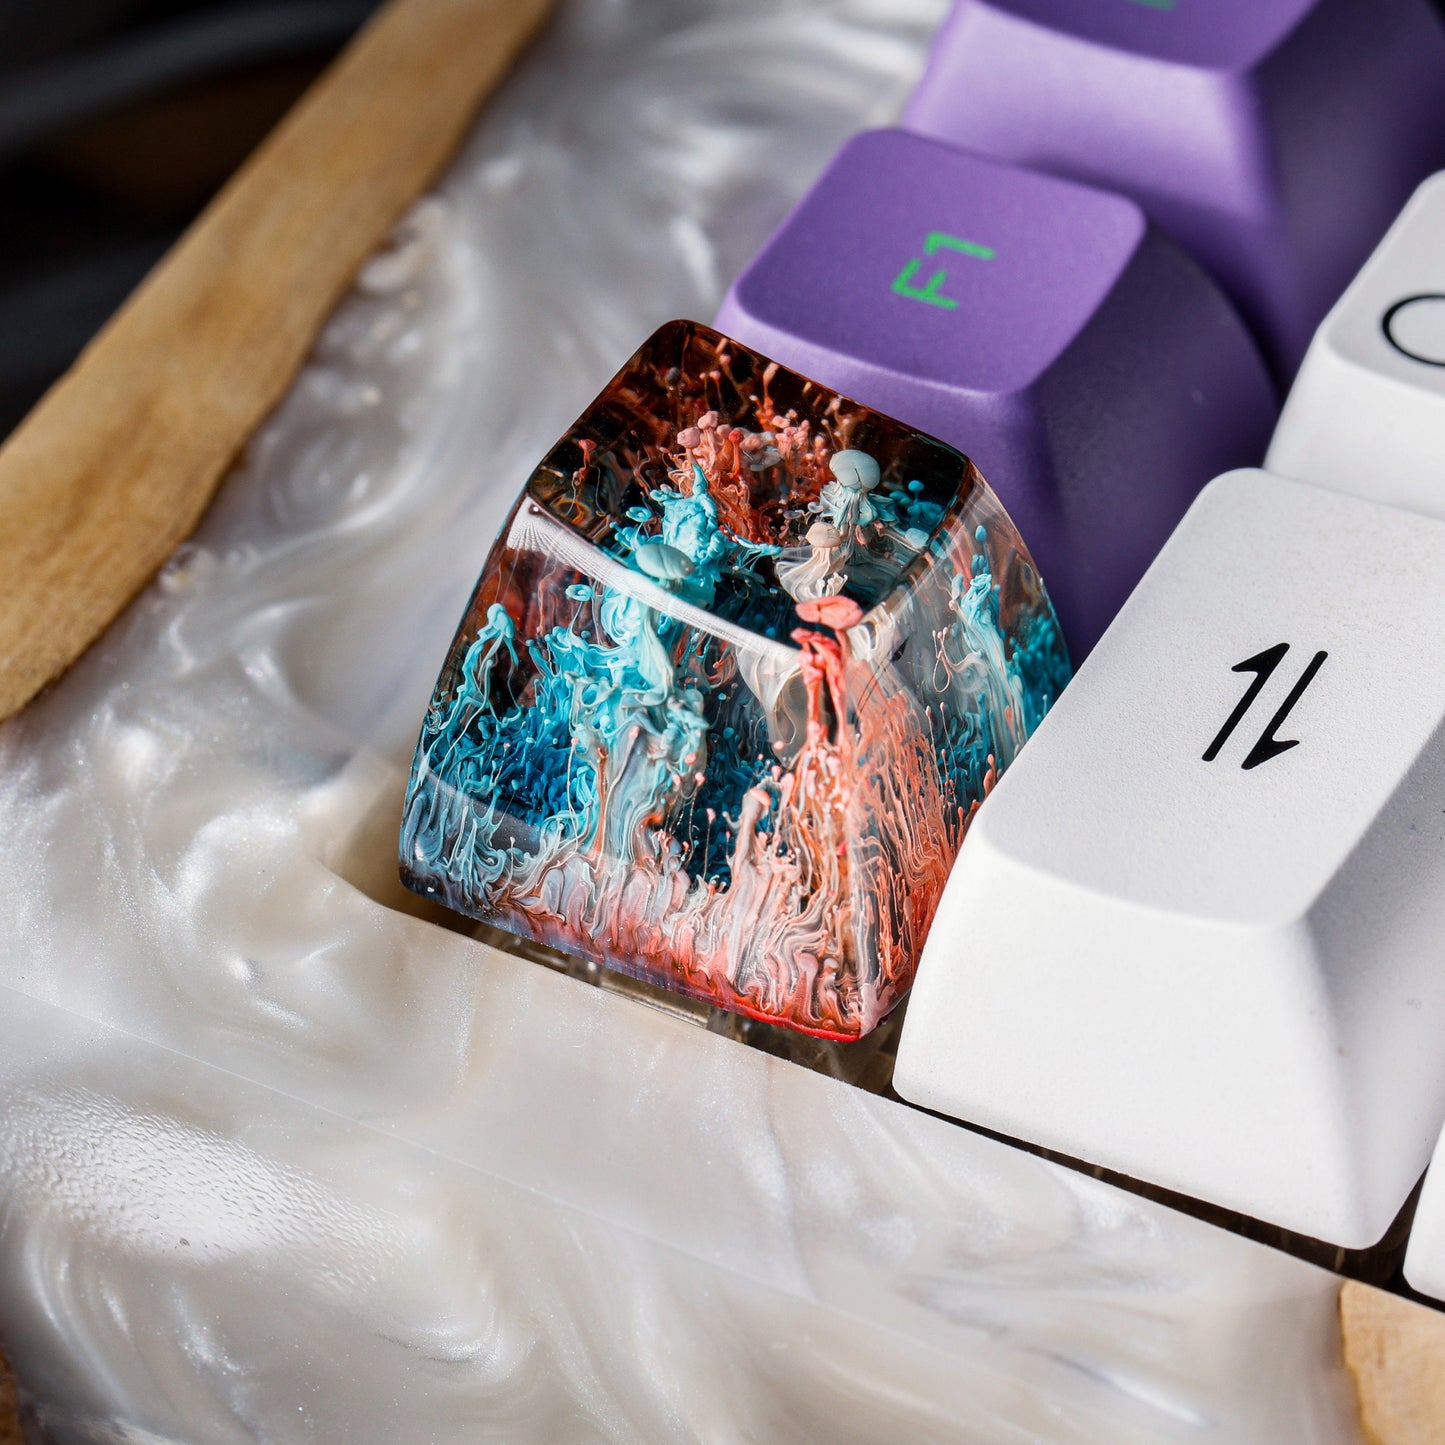 Red and Blue Coral Keycap- Ocean Keycap- Artisan Keycap- Keycap for MX Cherry Switches Keyboard - Datkey Studio